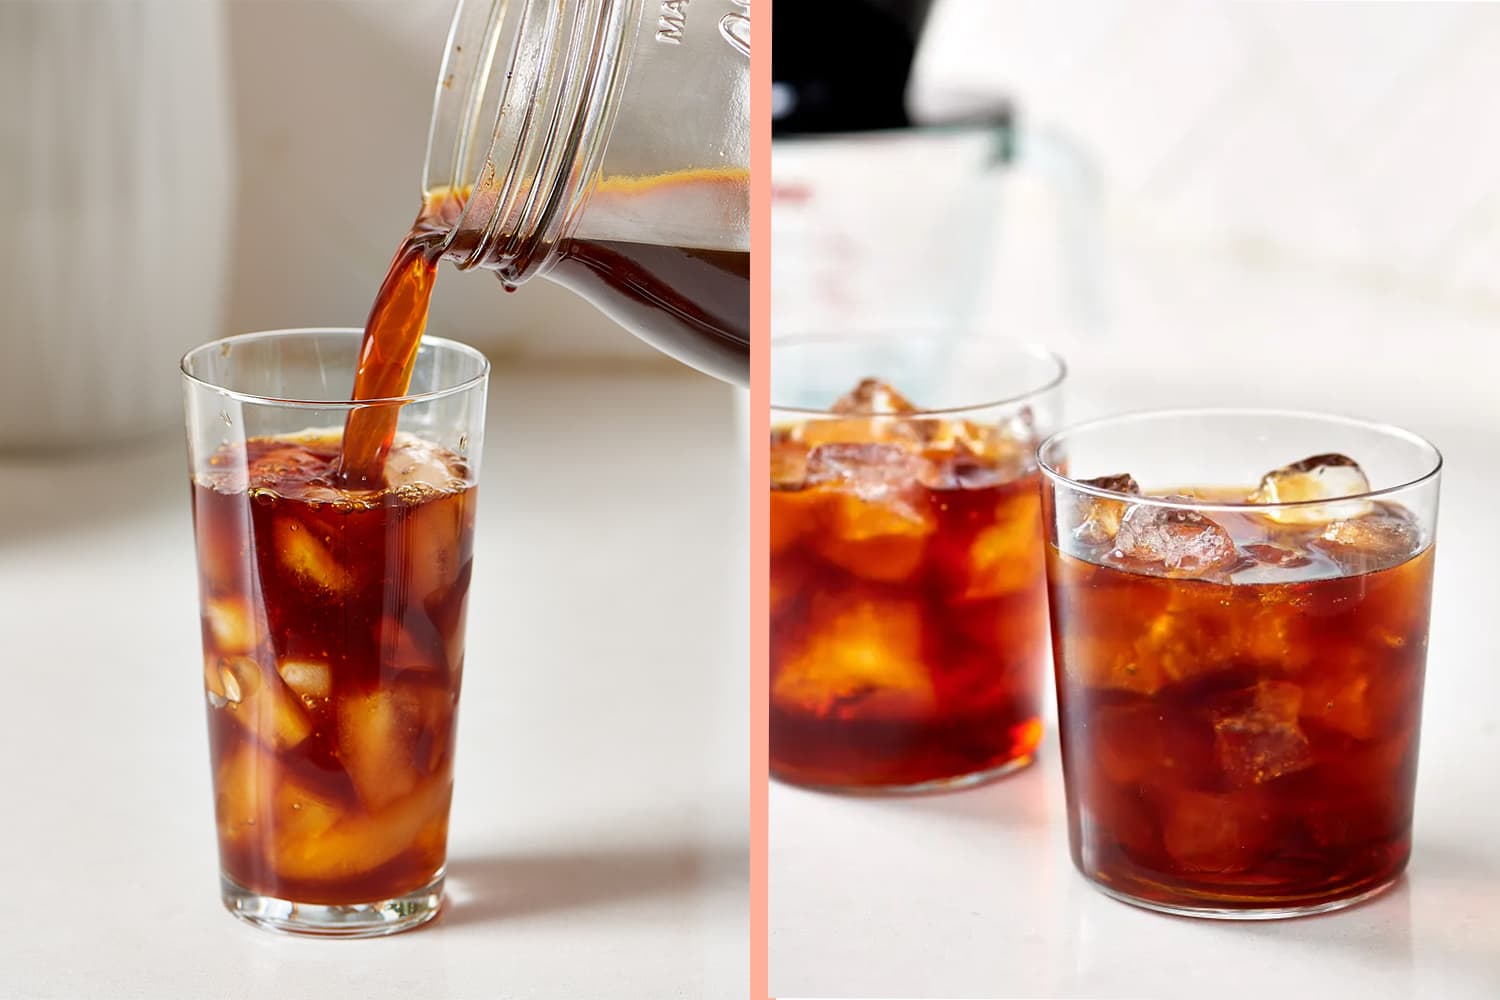 https://cdn.apartmenttherapy.info/image/upload/v1655820096/k/Photo/Recipes/06-2022-Cold-Brew-Vs-Iced-Coffee/cold-brew-vs-iced-coffee.jpg